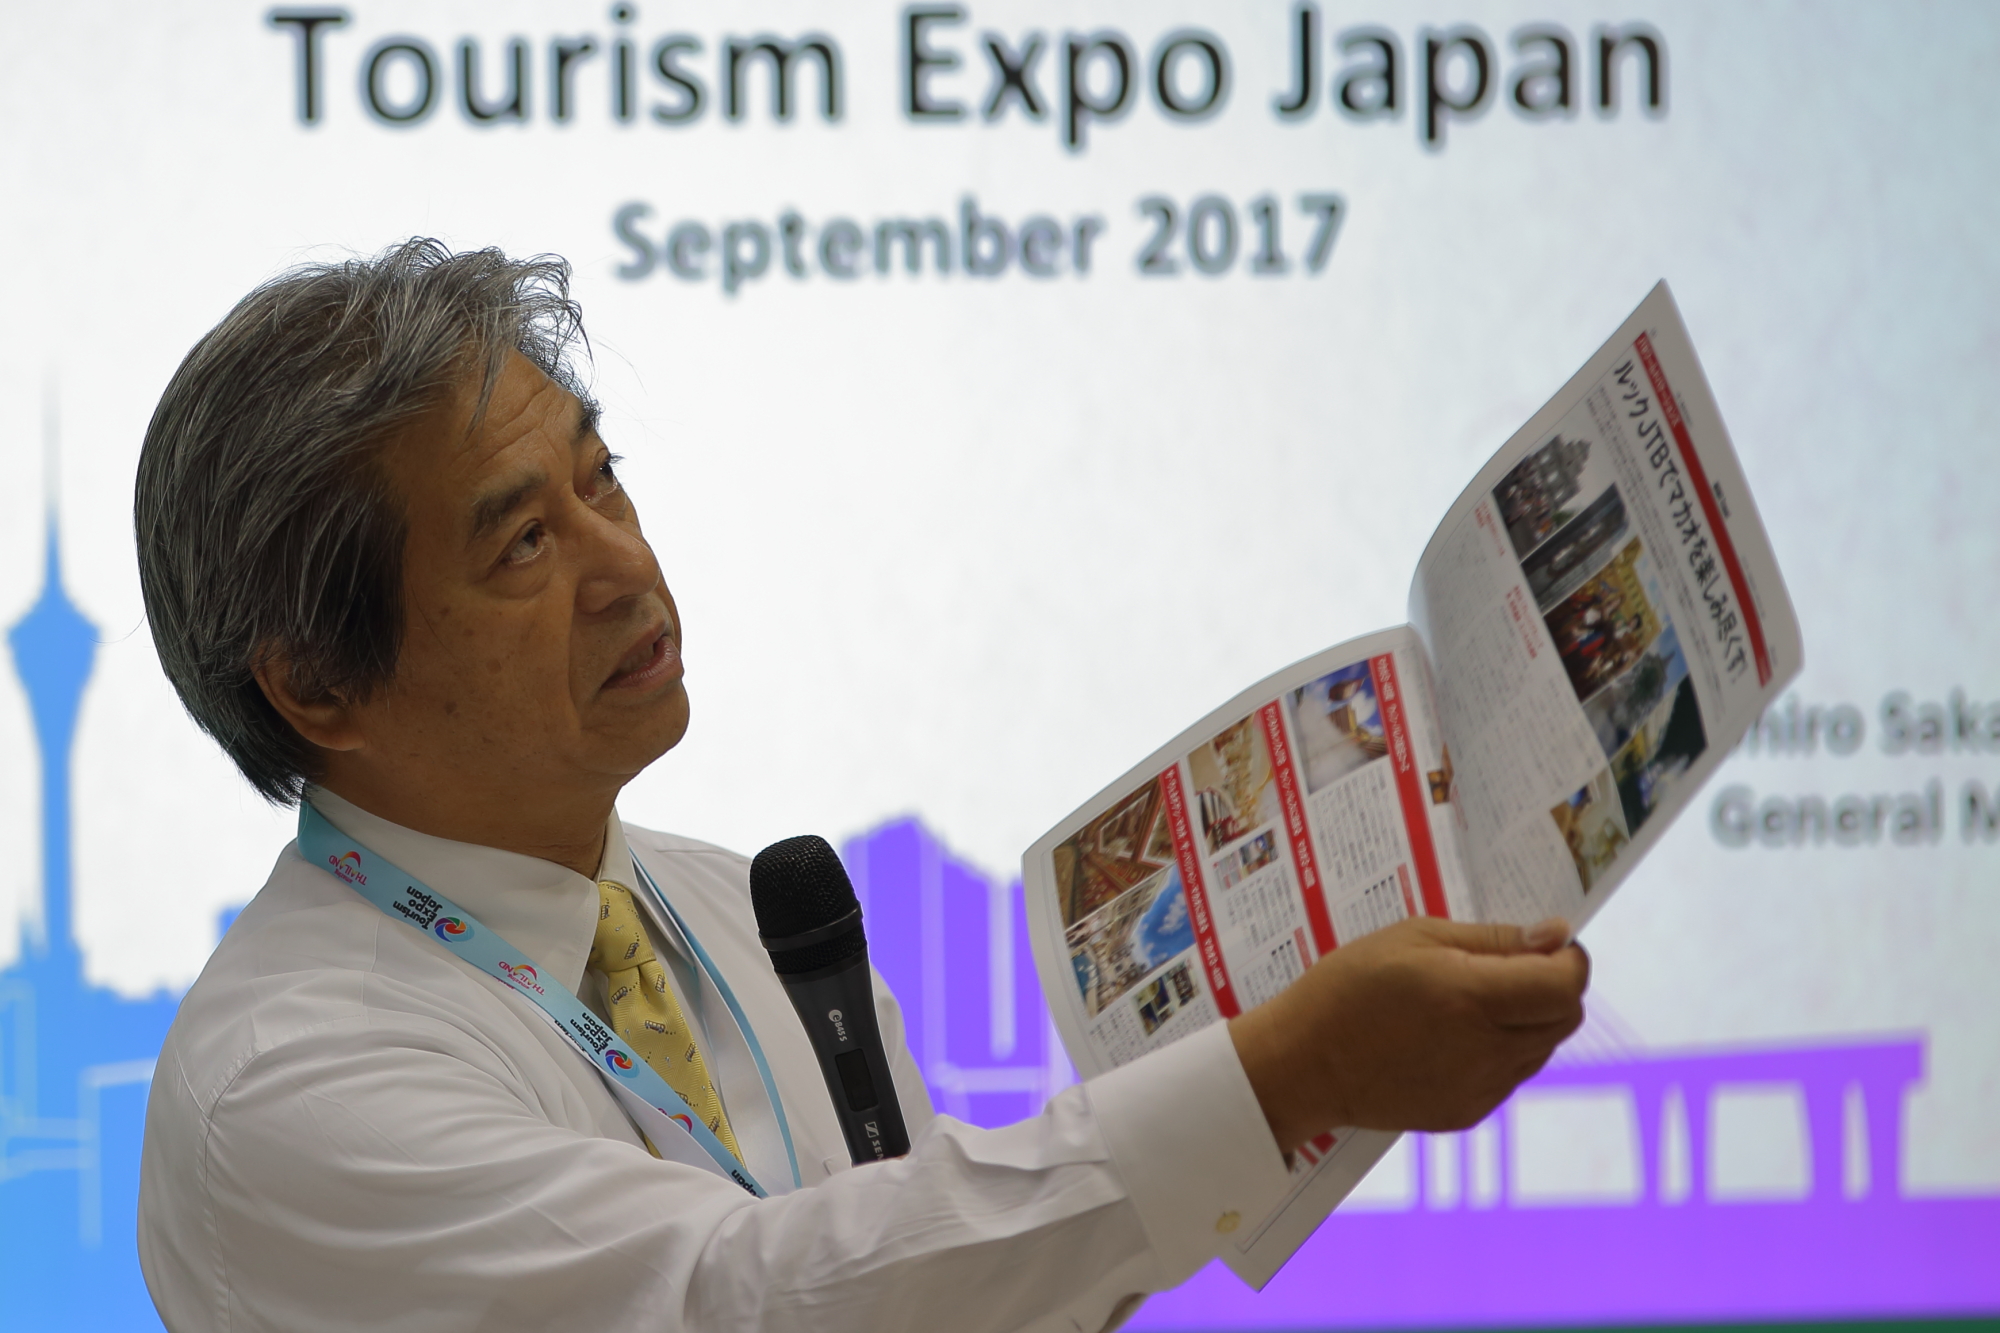 Mr. Fumihiro Sakakibara, General Manager - Japan, Macao Government Tourism Office, gave a very interesting and informative presentation at Tourism Expo Japan 2017. Click to enlarge.